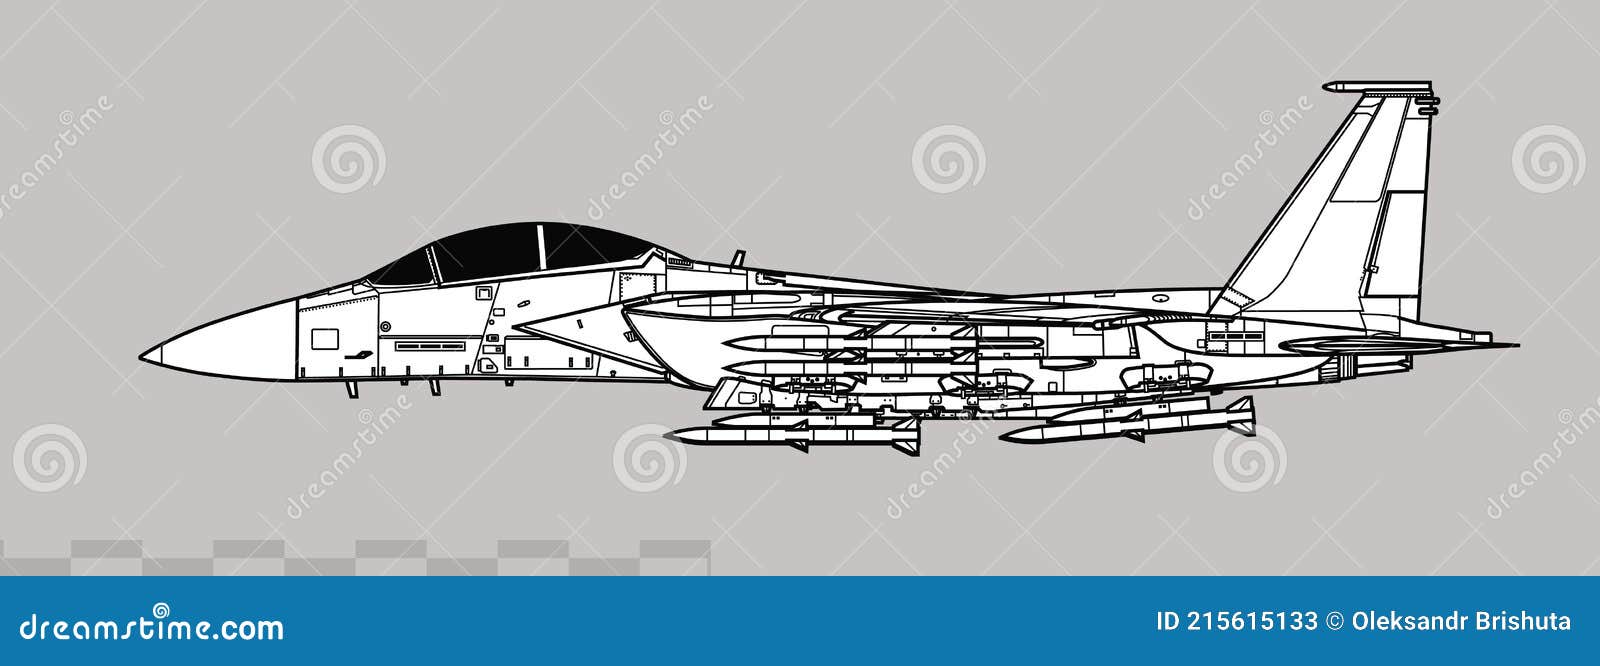 boeing-f-ex-eagle-ii-vector-drawing-air-superiority-fighter-side-view-image-illustration-infographics-215615133.jpg